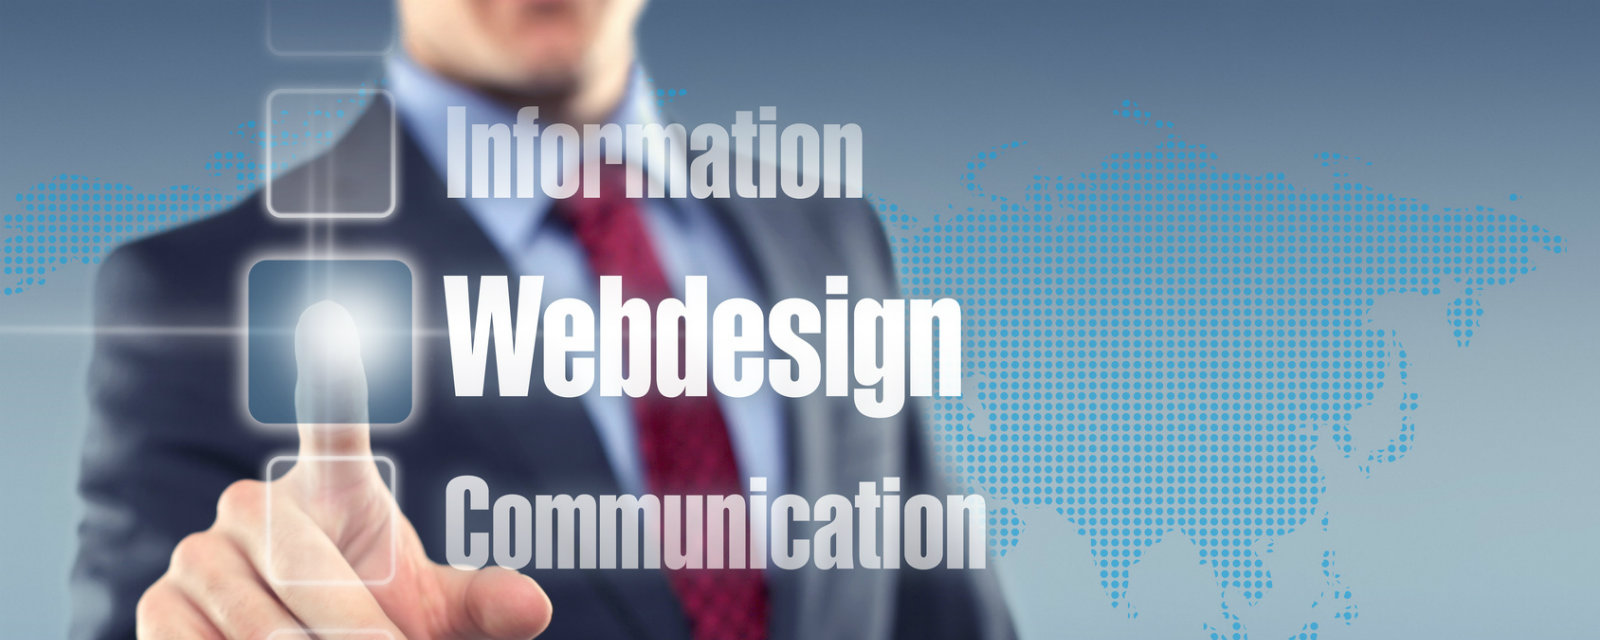 Web Design Solutions for Every Budget